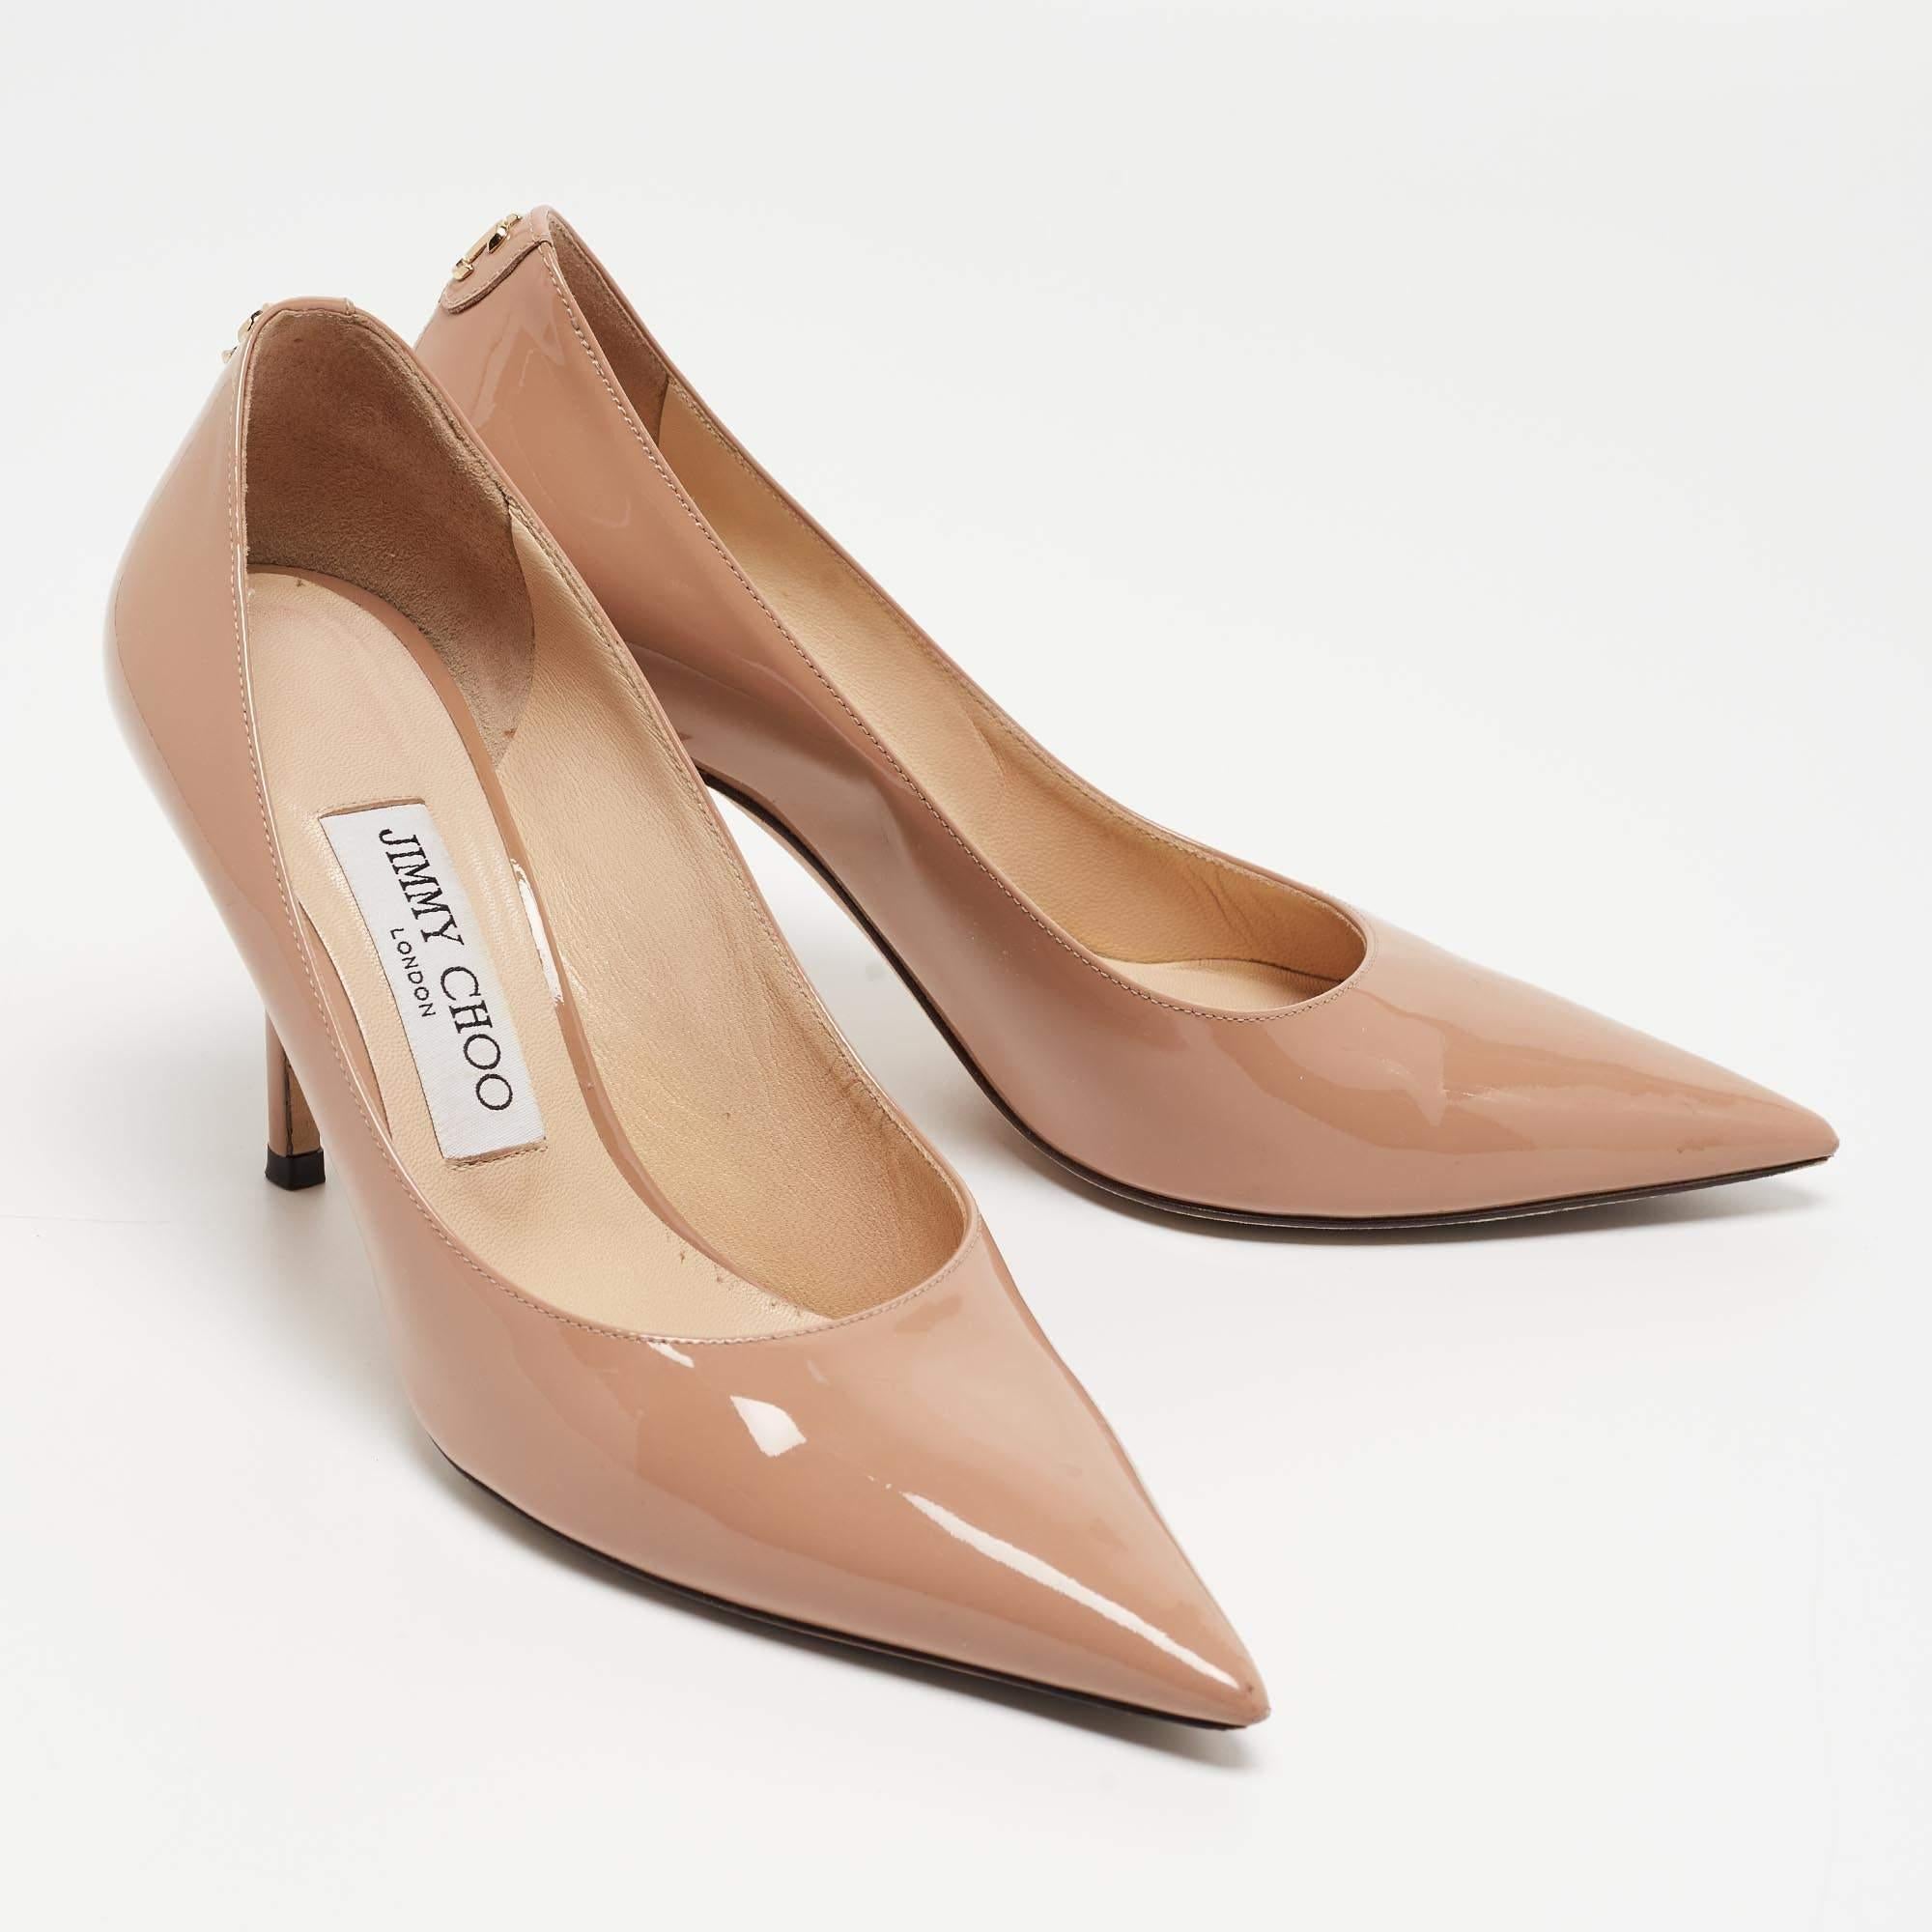 Jimmy Choo Dusty Pink Patent Leather Love Pumps Size 36 In Good Condition For Sale In Dubai, Al Qouz 2